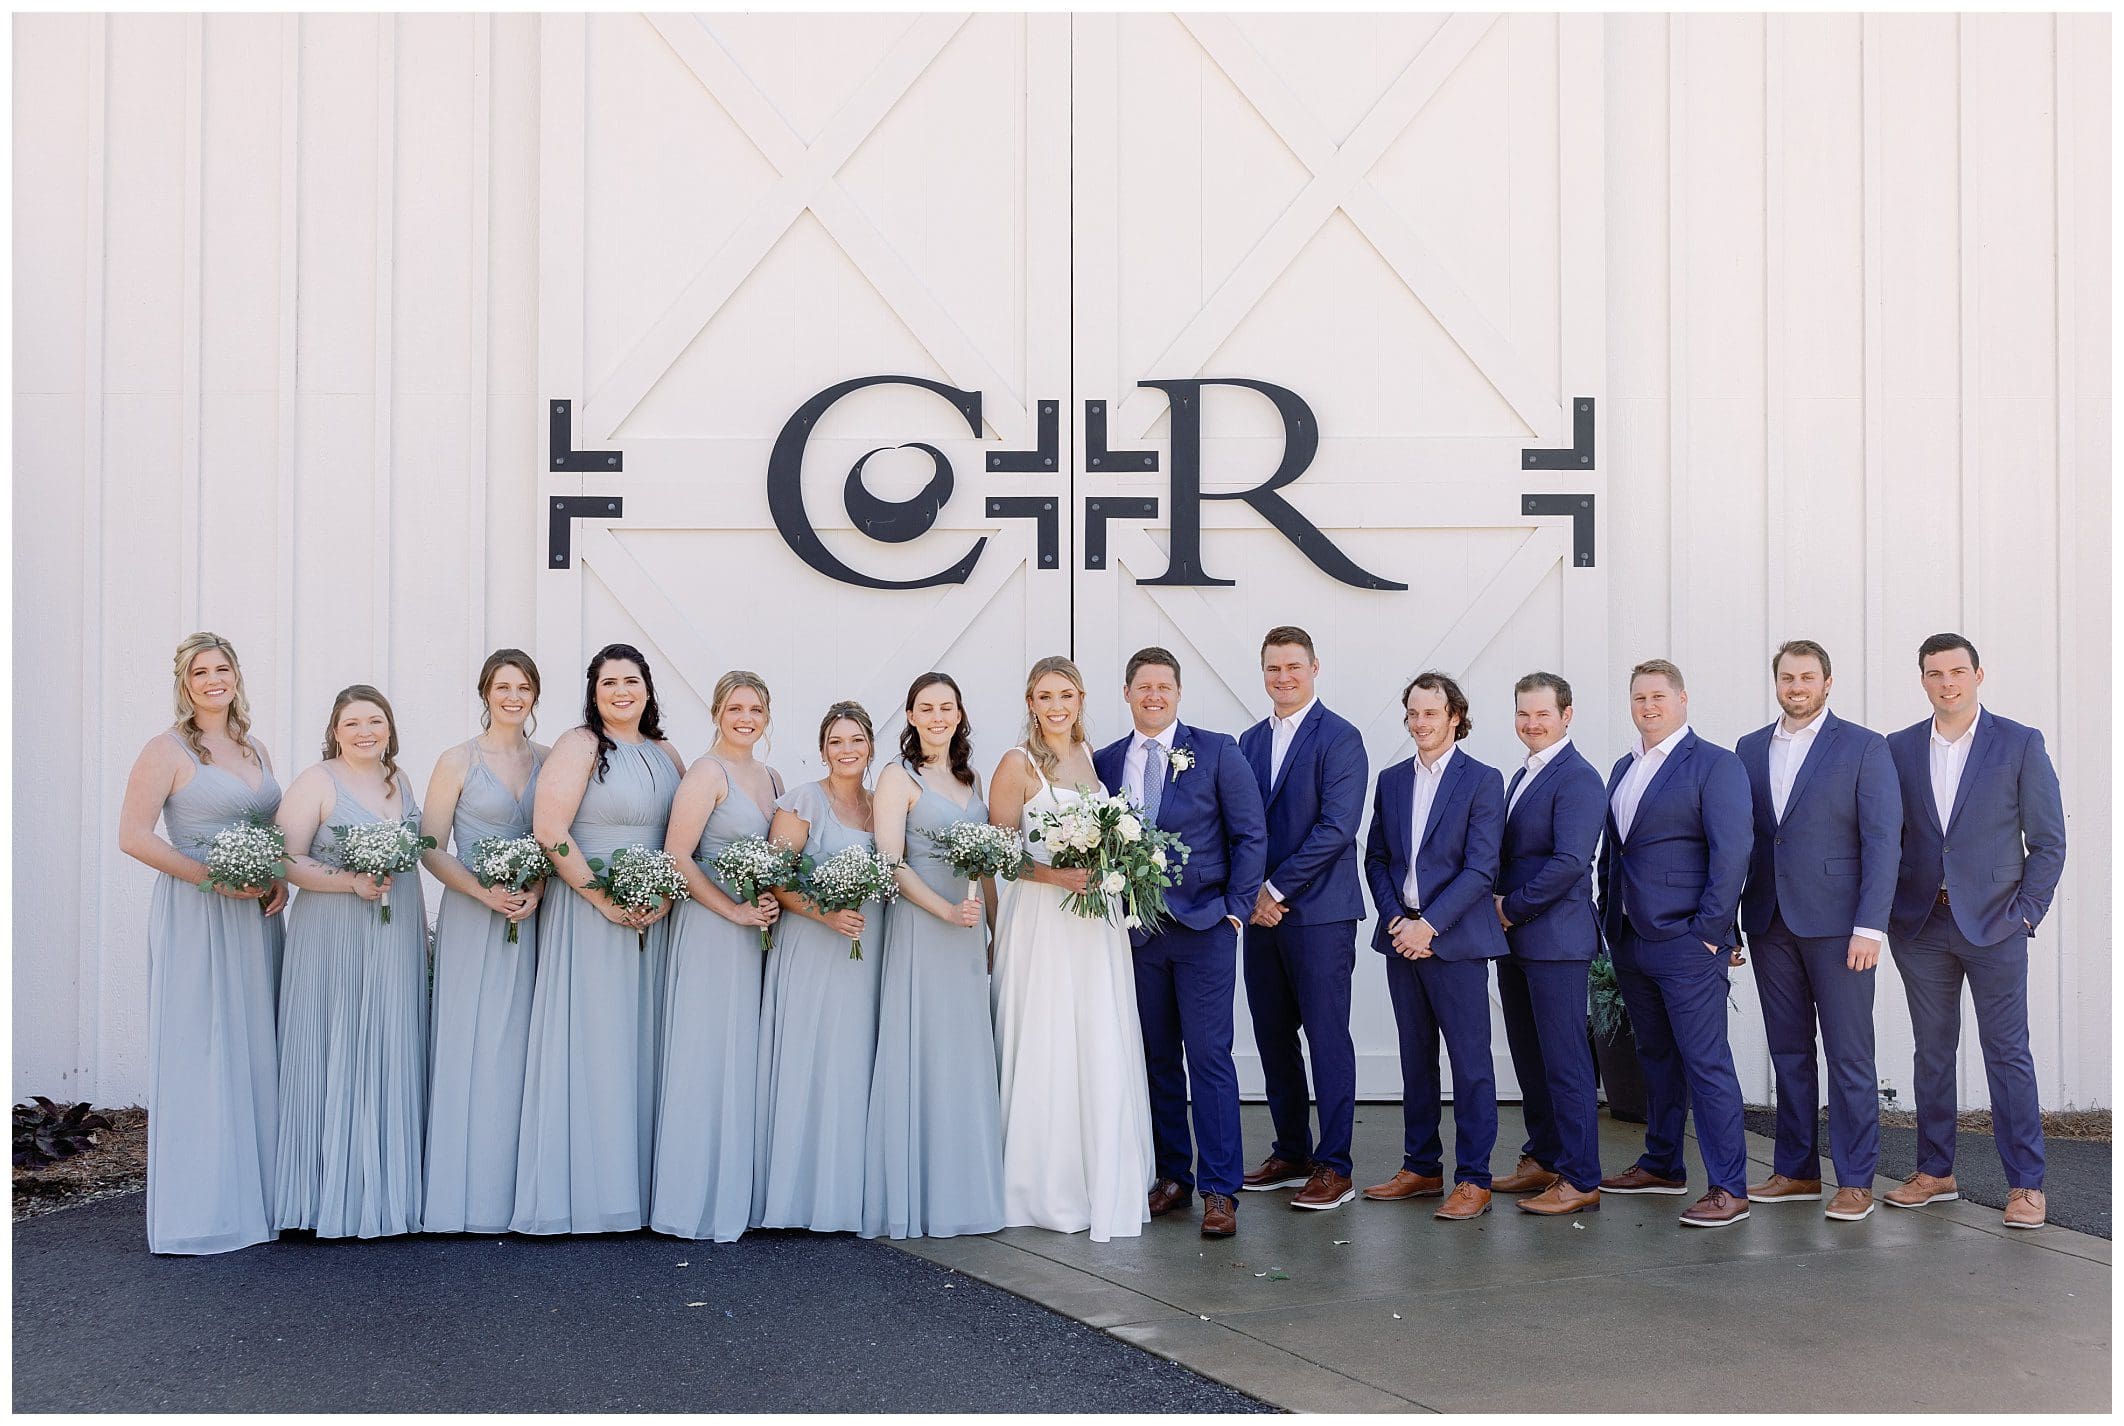 A group of bridesmaids and groomsmen posing in front of a barn.